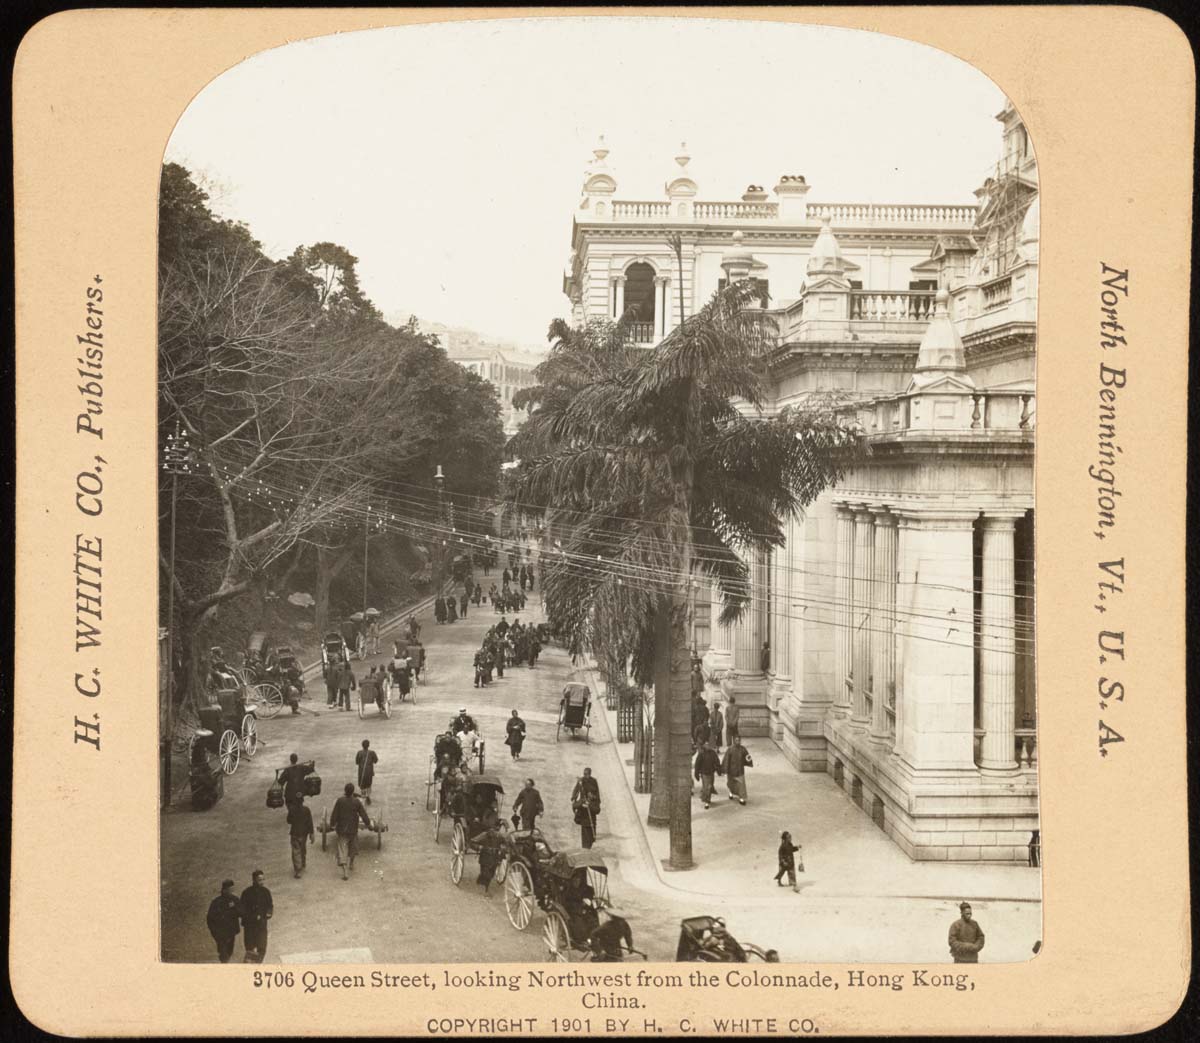 Hong Kong. Queen Street, looking northwest from the Colonnade, between 1900 and 1910